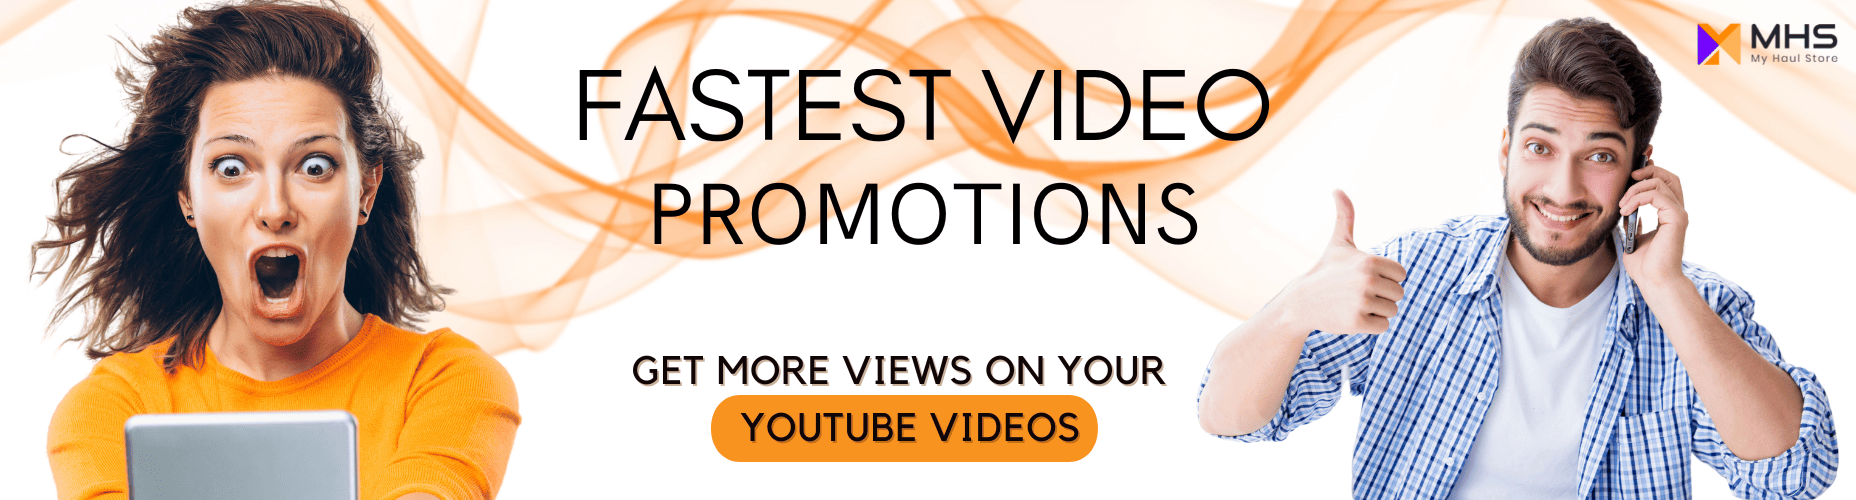 YouTube promotion, YouTube promotion services, increase view rate